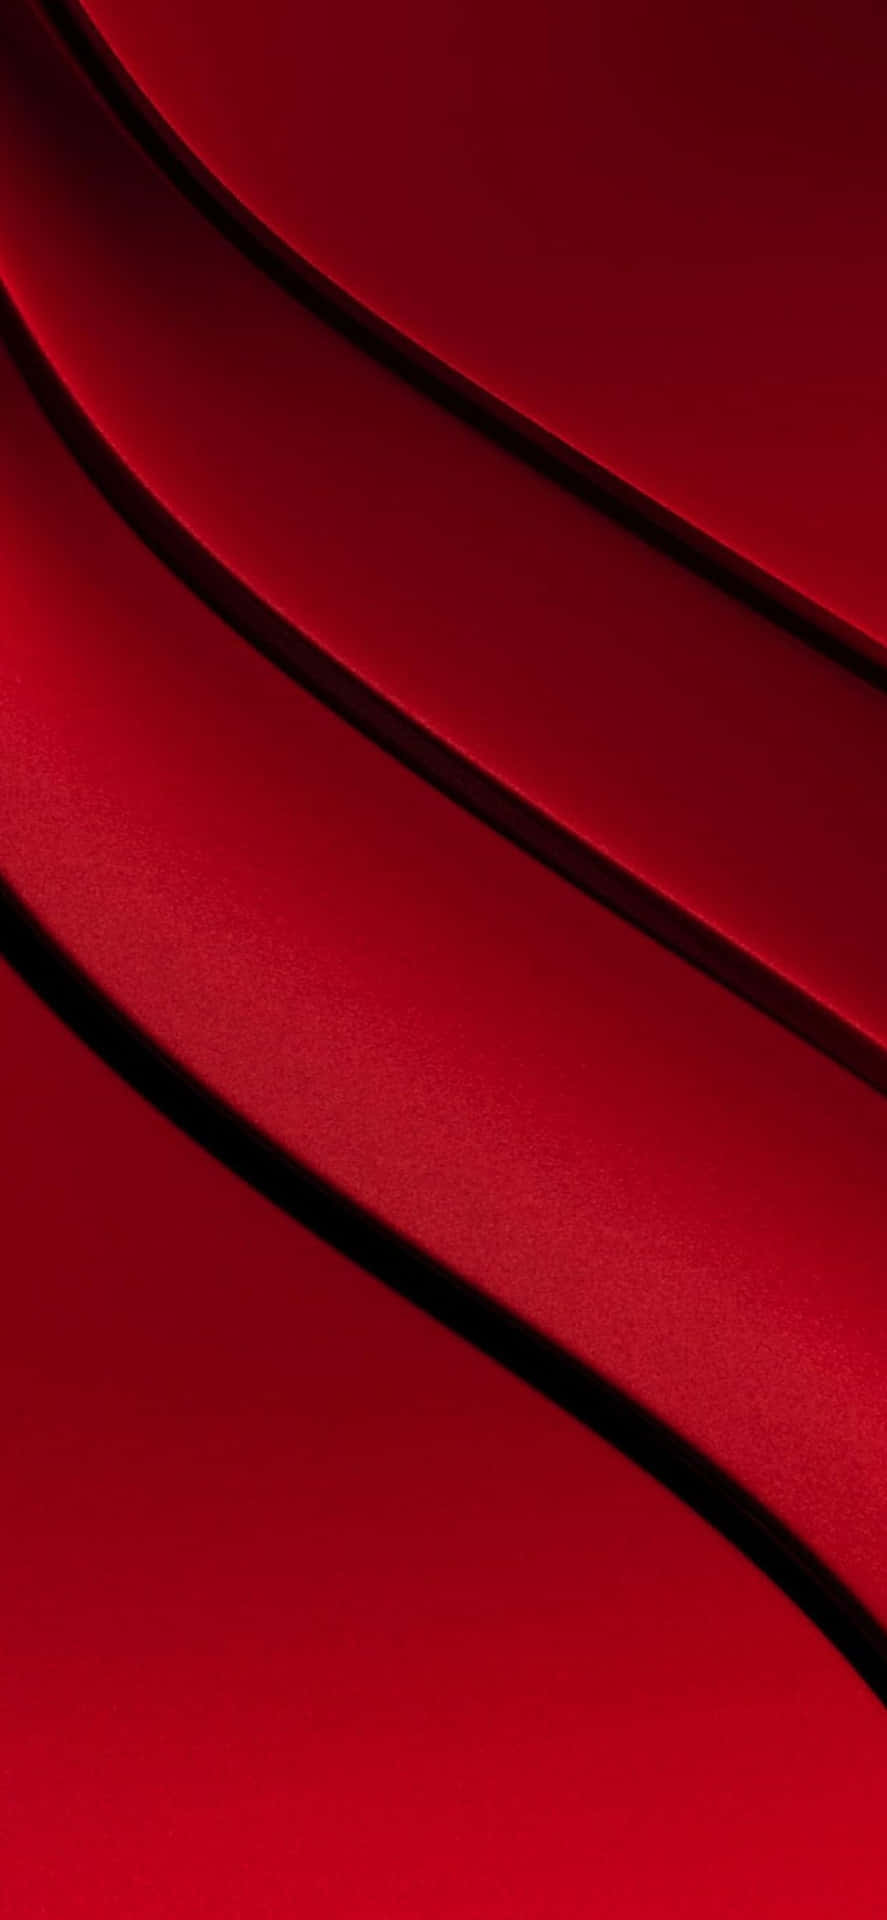 Red Background With A Curved Shape